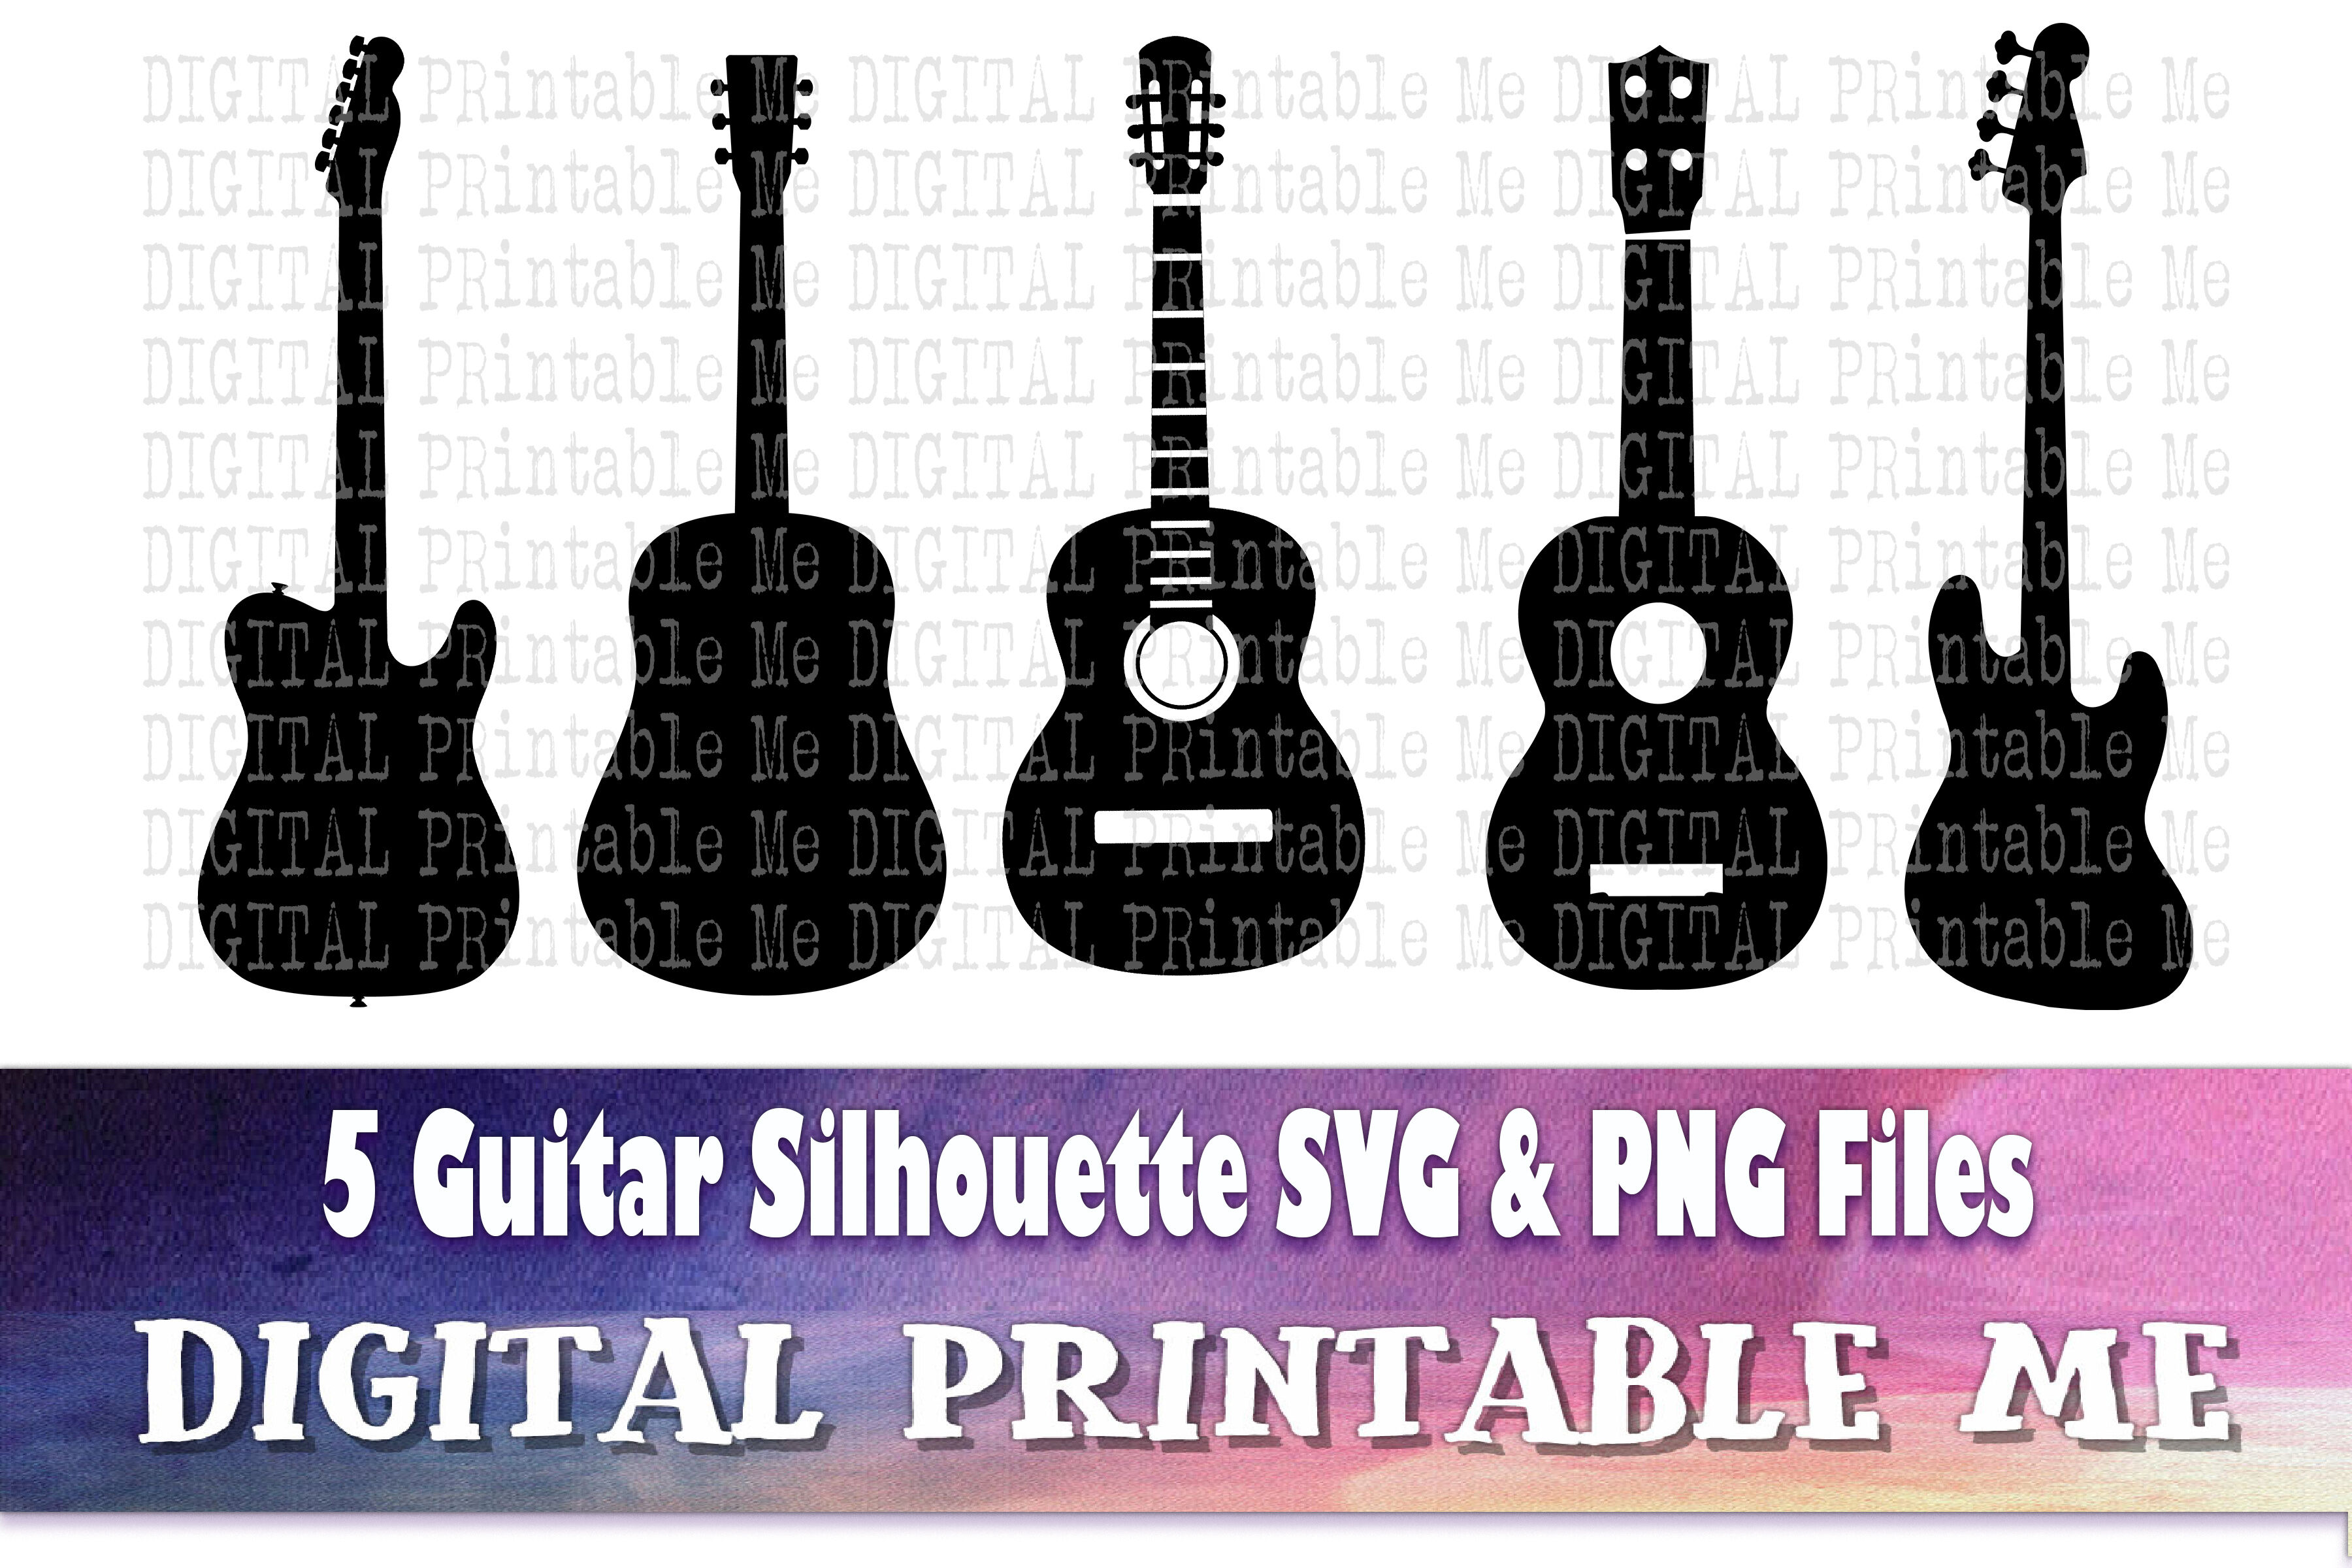 Guitar Silhouette Svg Png Clip Art Pack 5 Images Pack Instant By Digitalprintableme Thehungryjpeg Com